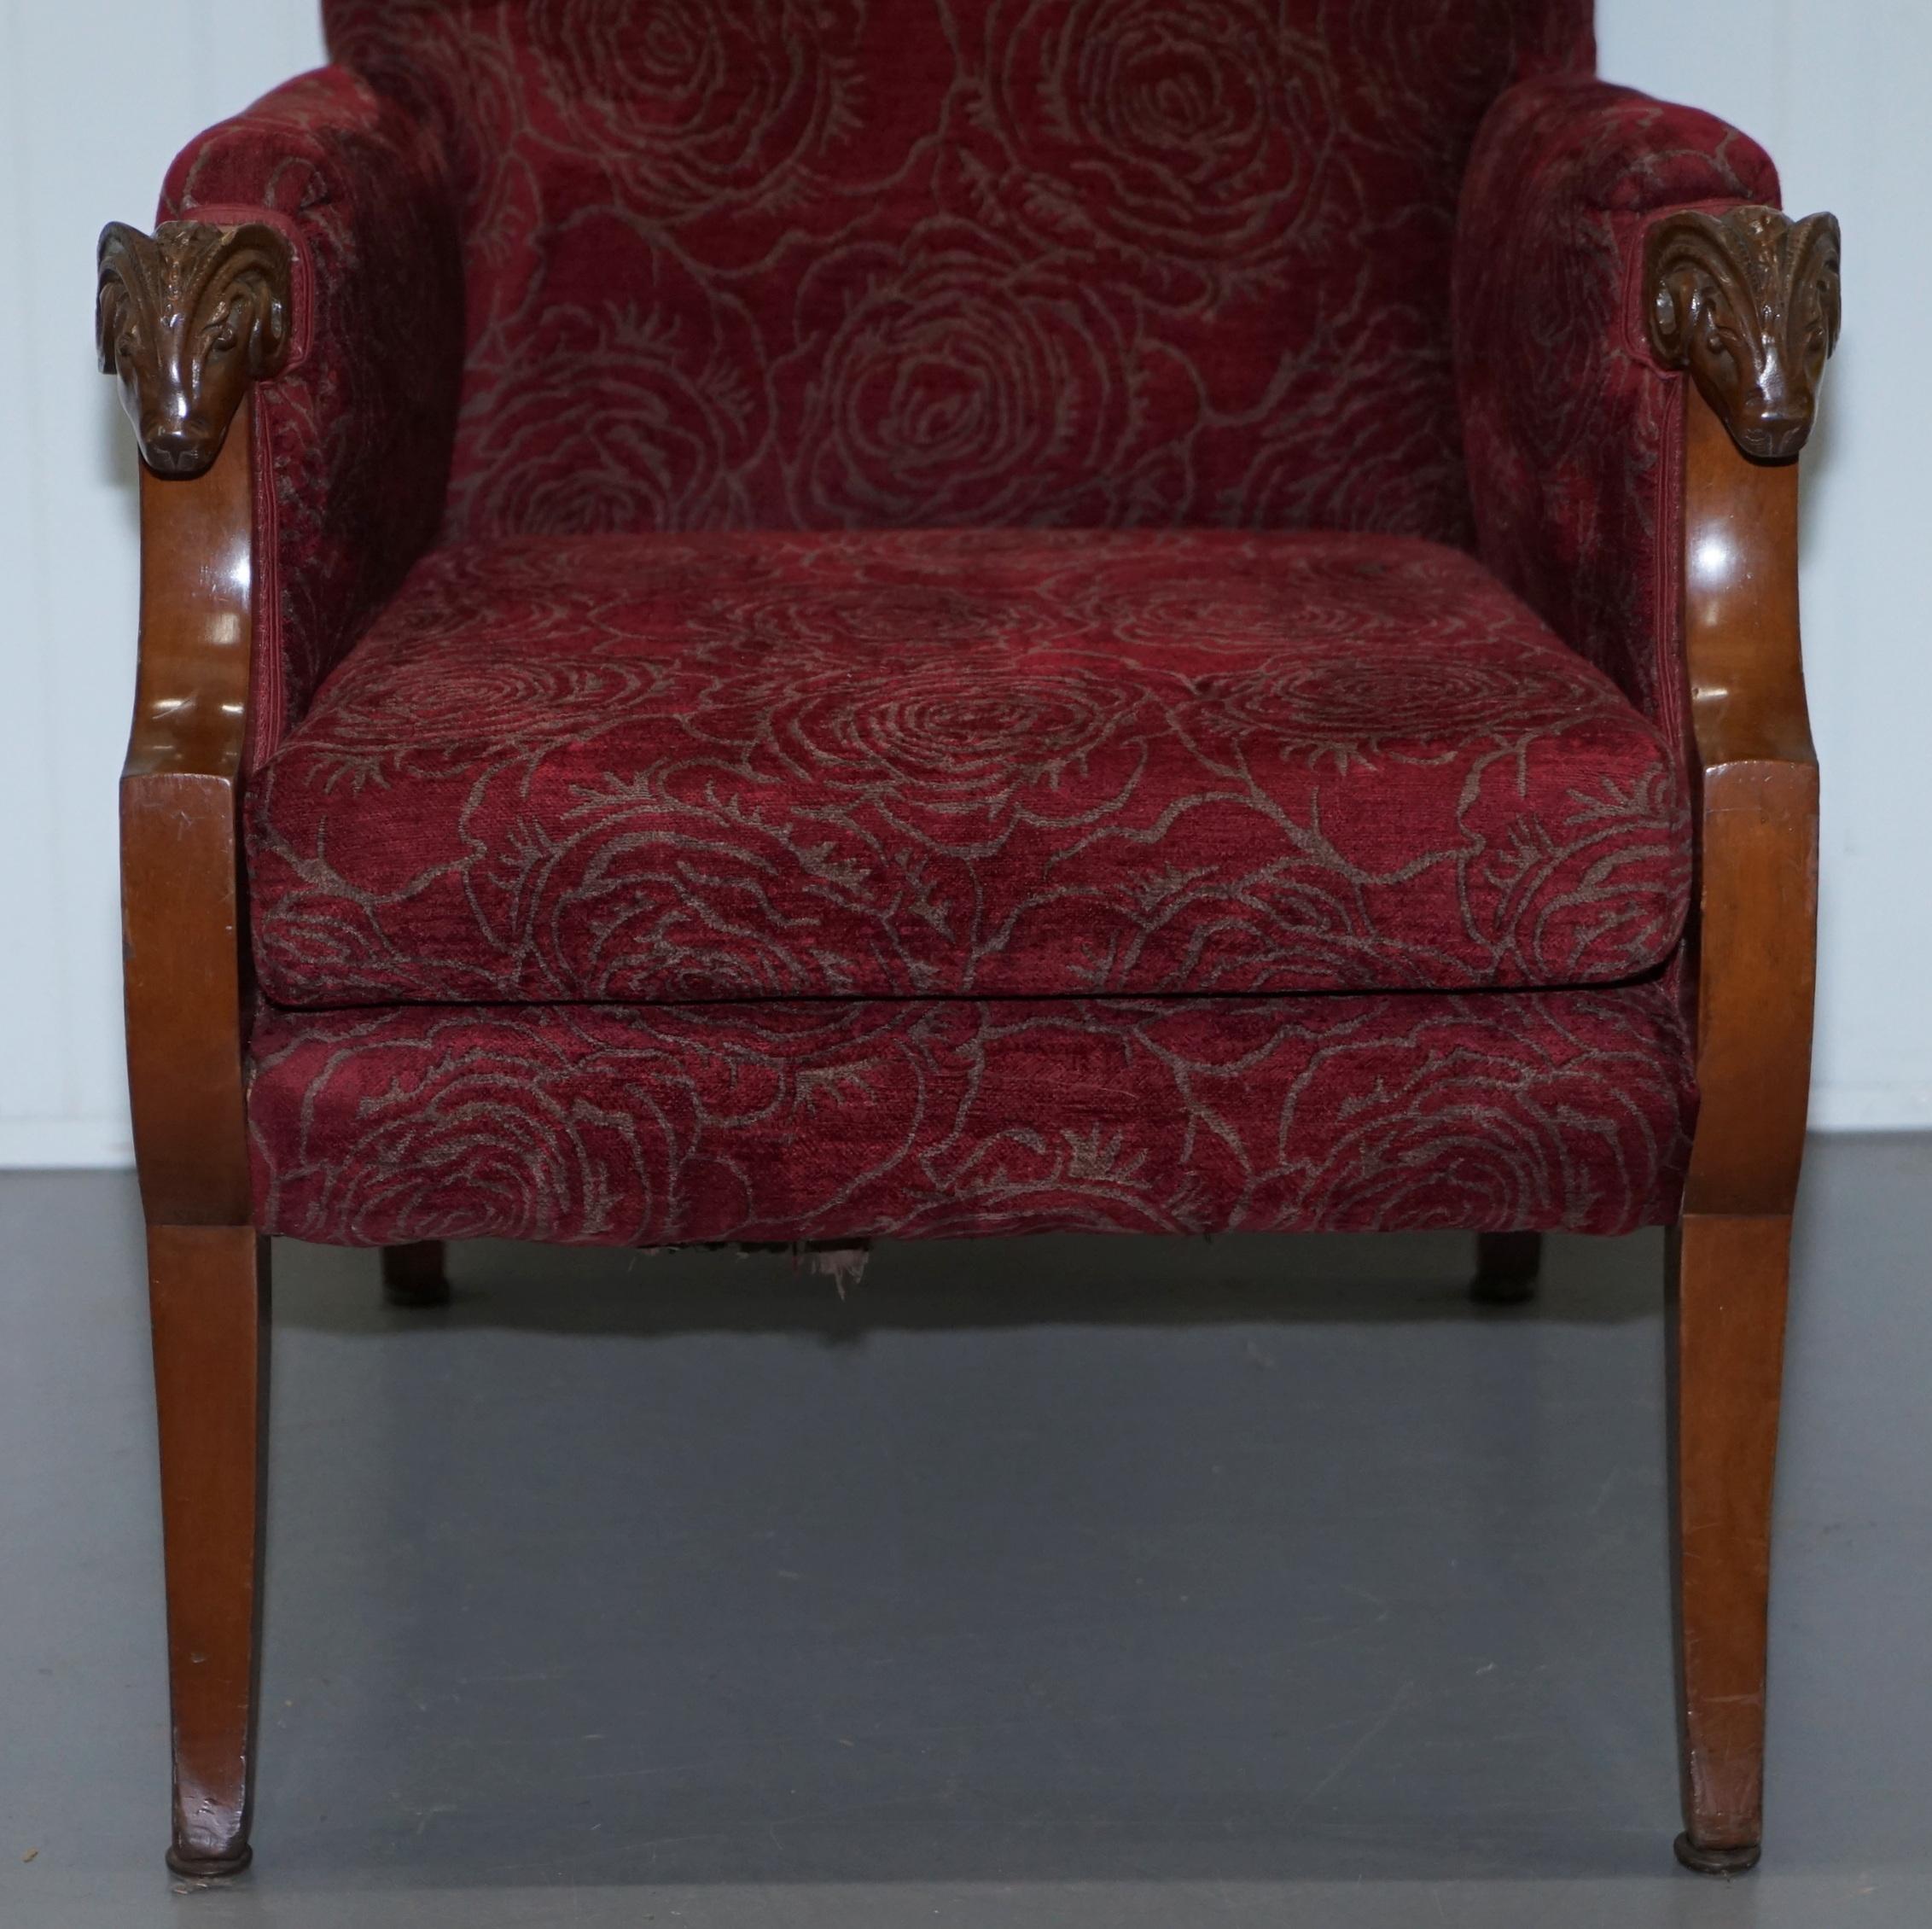 Vintage Carved Rams Head Armchair Vintage Piece Red Floral Upholstery For Sale 4